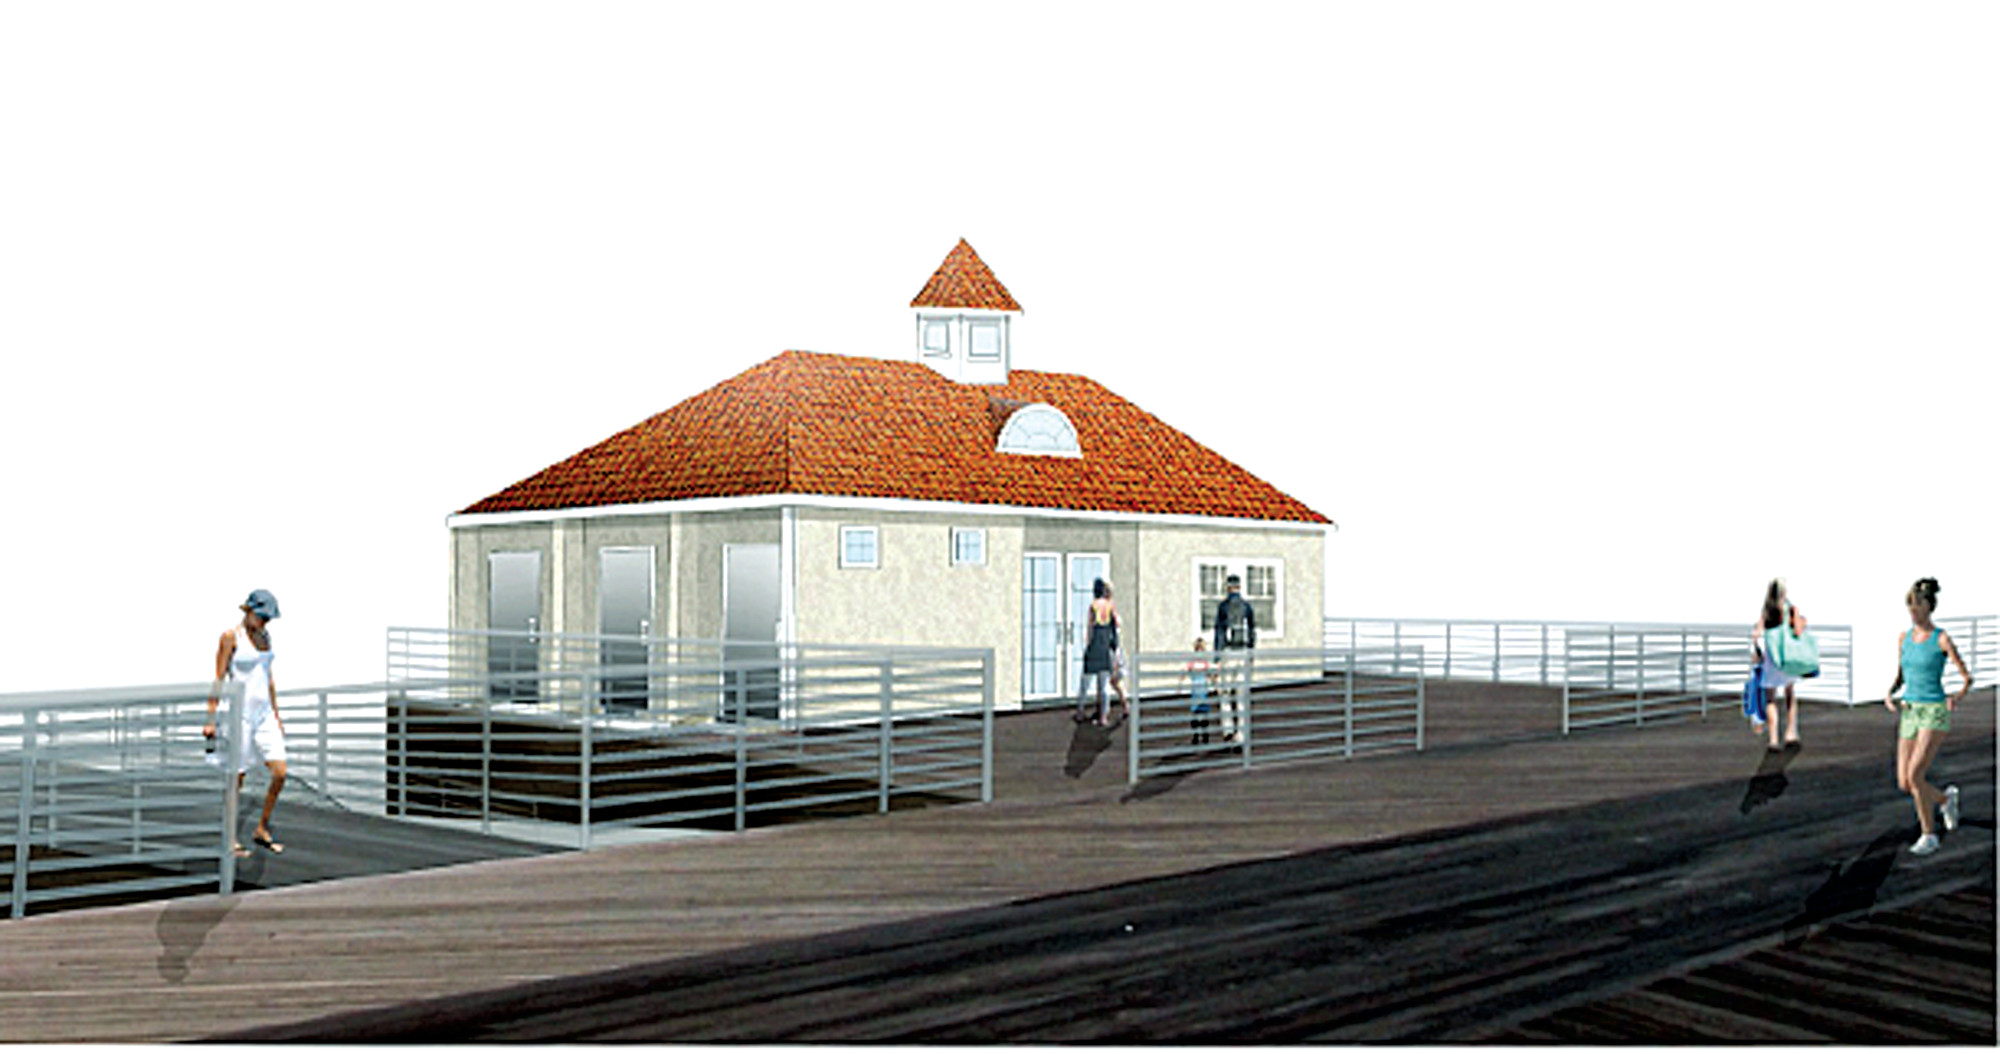 This planned comfort station at National Boulevard will feature three ADA-compliant bathrooms and a police substation at the boardwalk level.